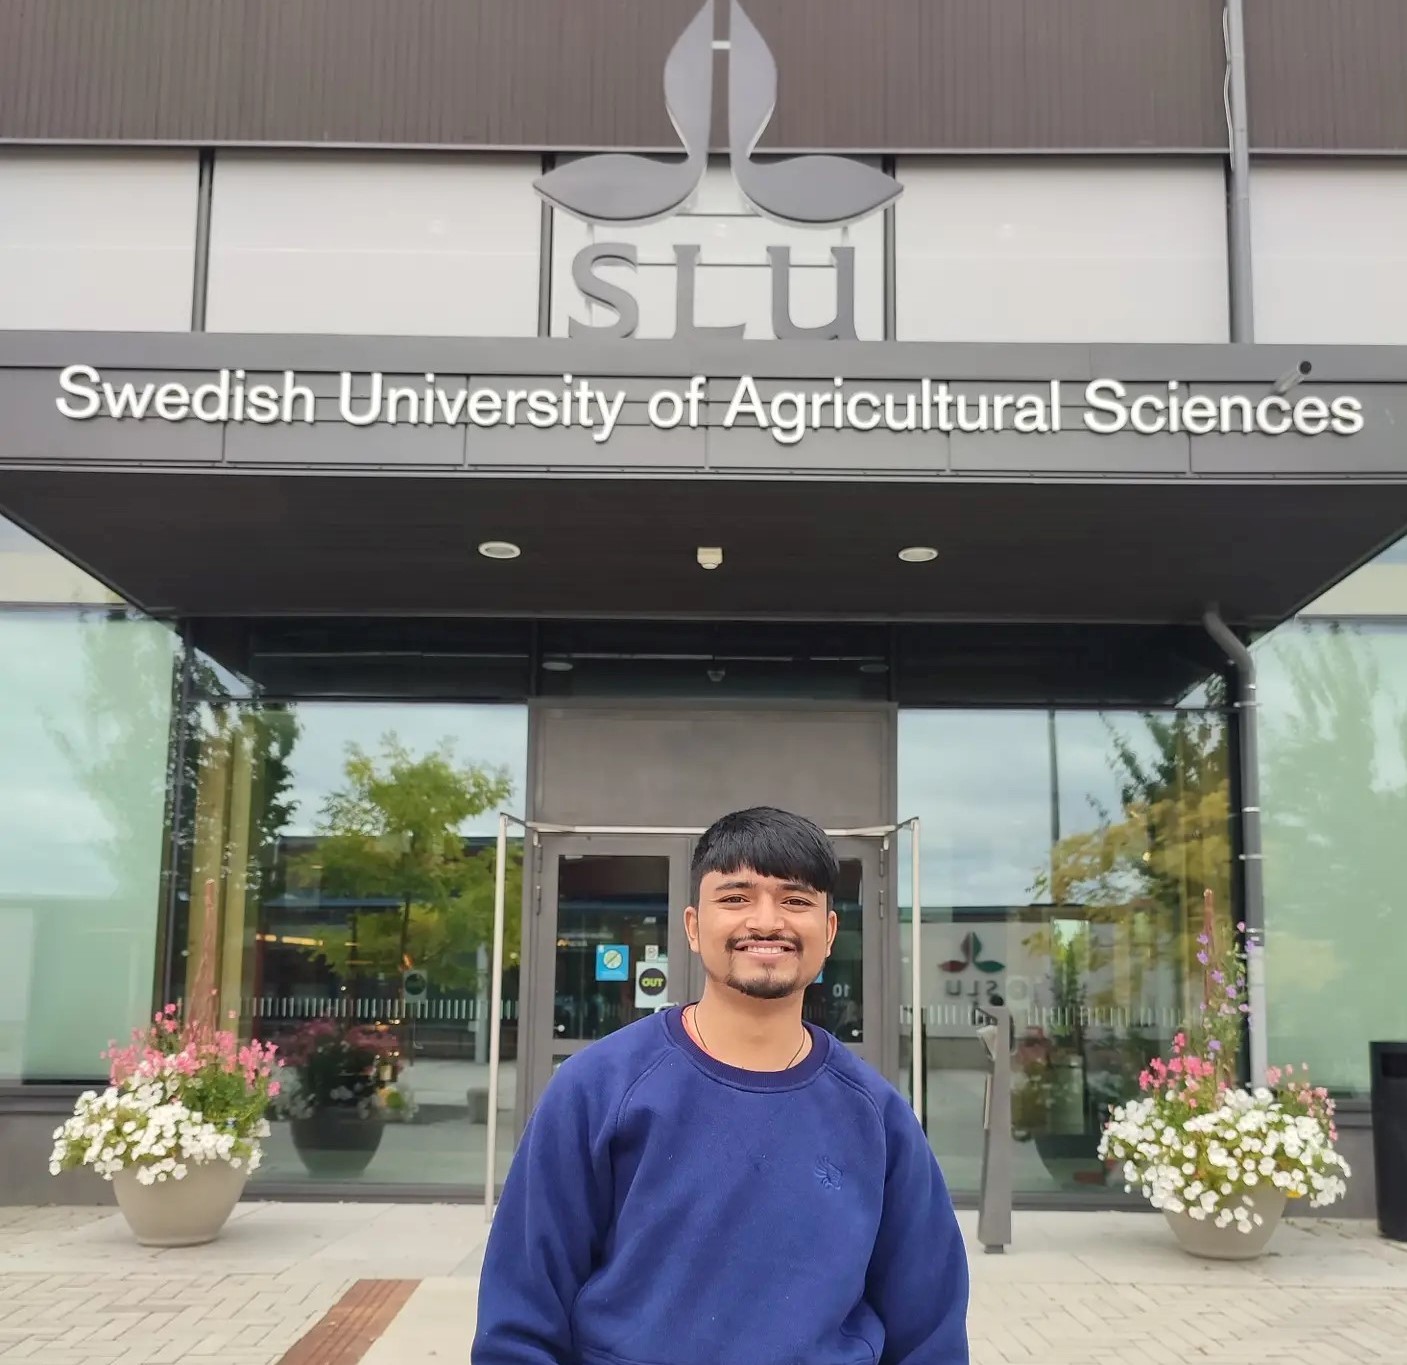 An image of a man standing in front of a house. The house has a sign that says "SLU Swedish University of Agricultural Sciences